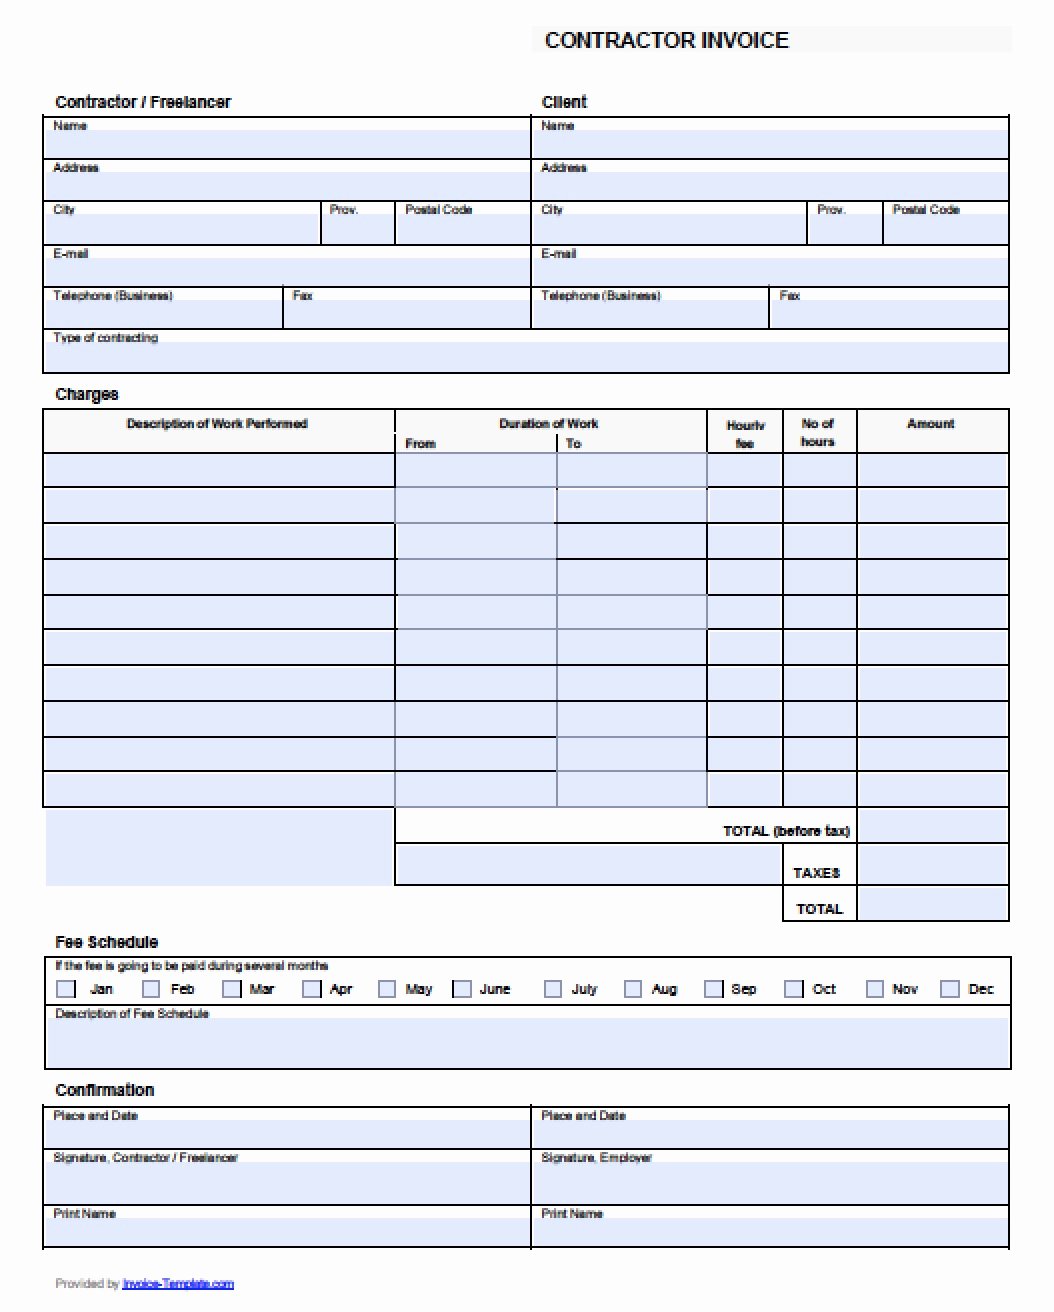 Independent Contractor Invoice Template Pdf Elegant Free Contractor Invoice Template Excel Pdf